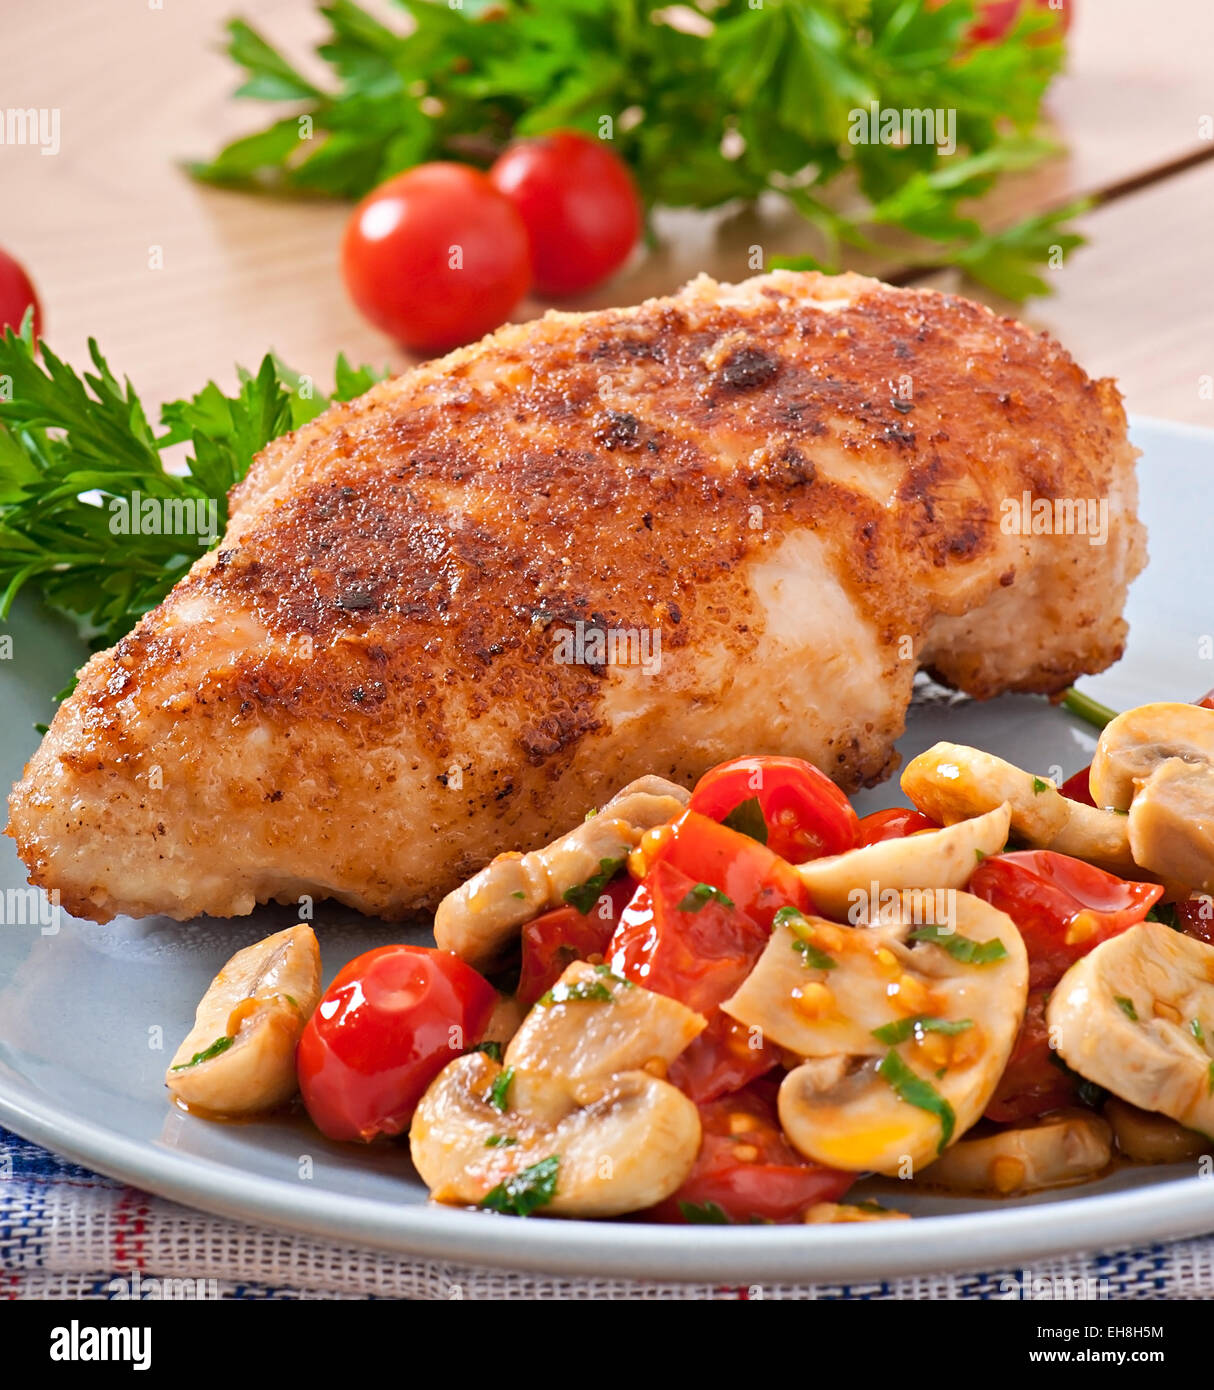 Chicken fillet in crispy breadcrumbs garnished with mushrooms and tomatoes Stock Photo